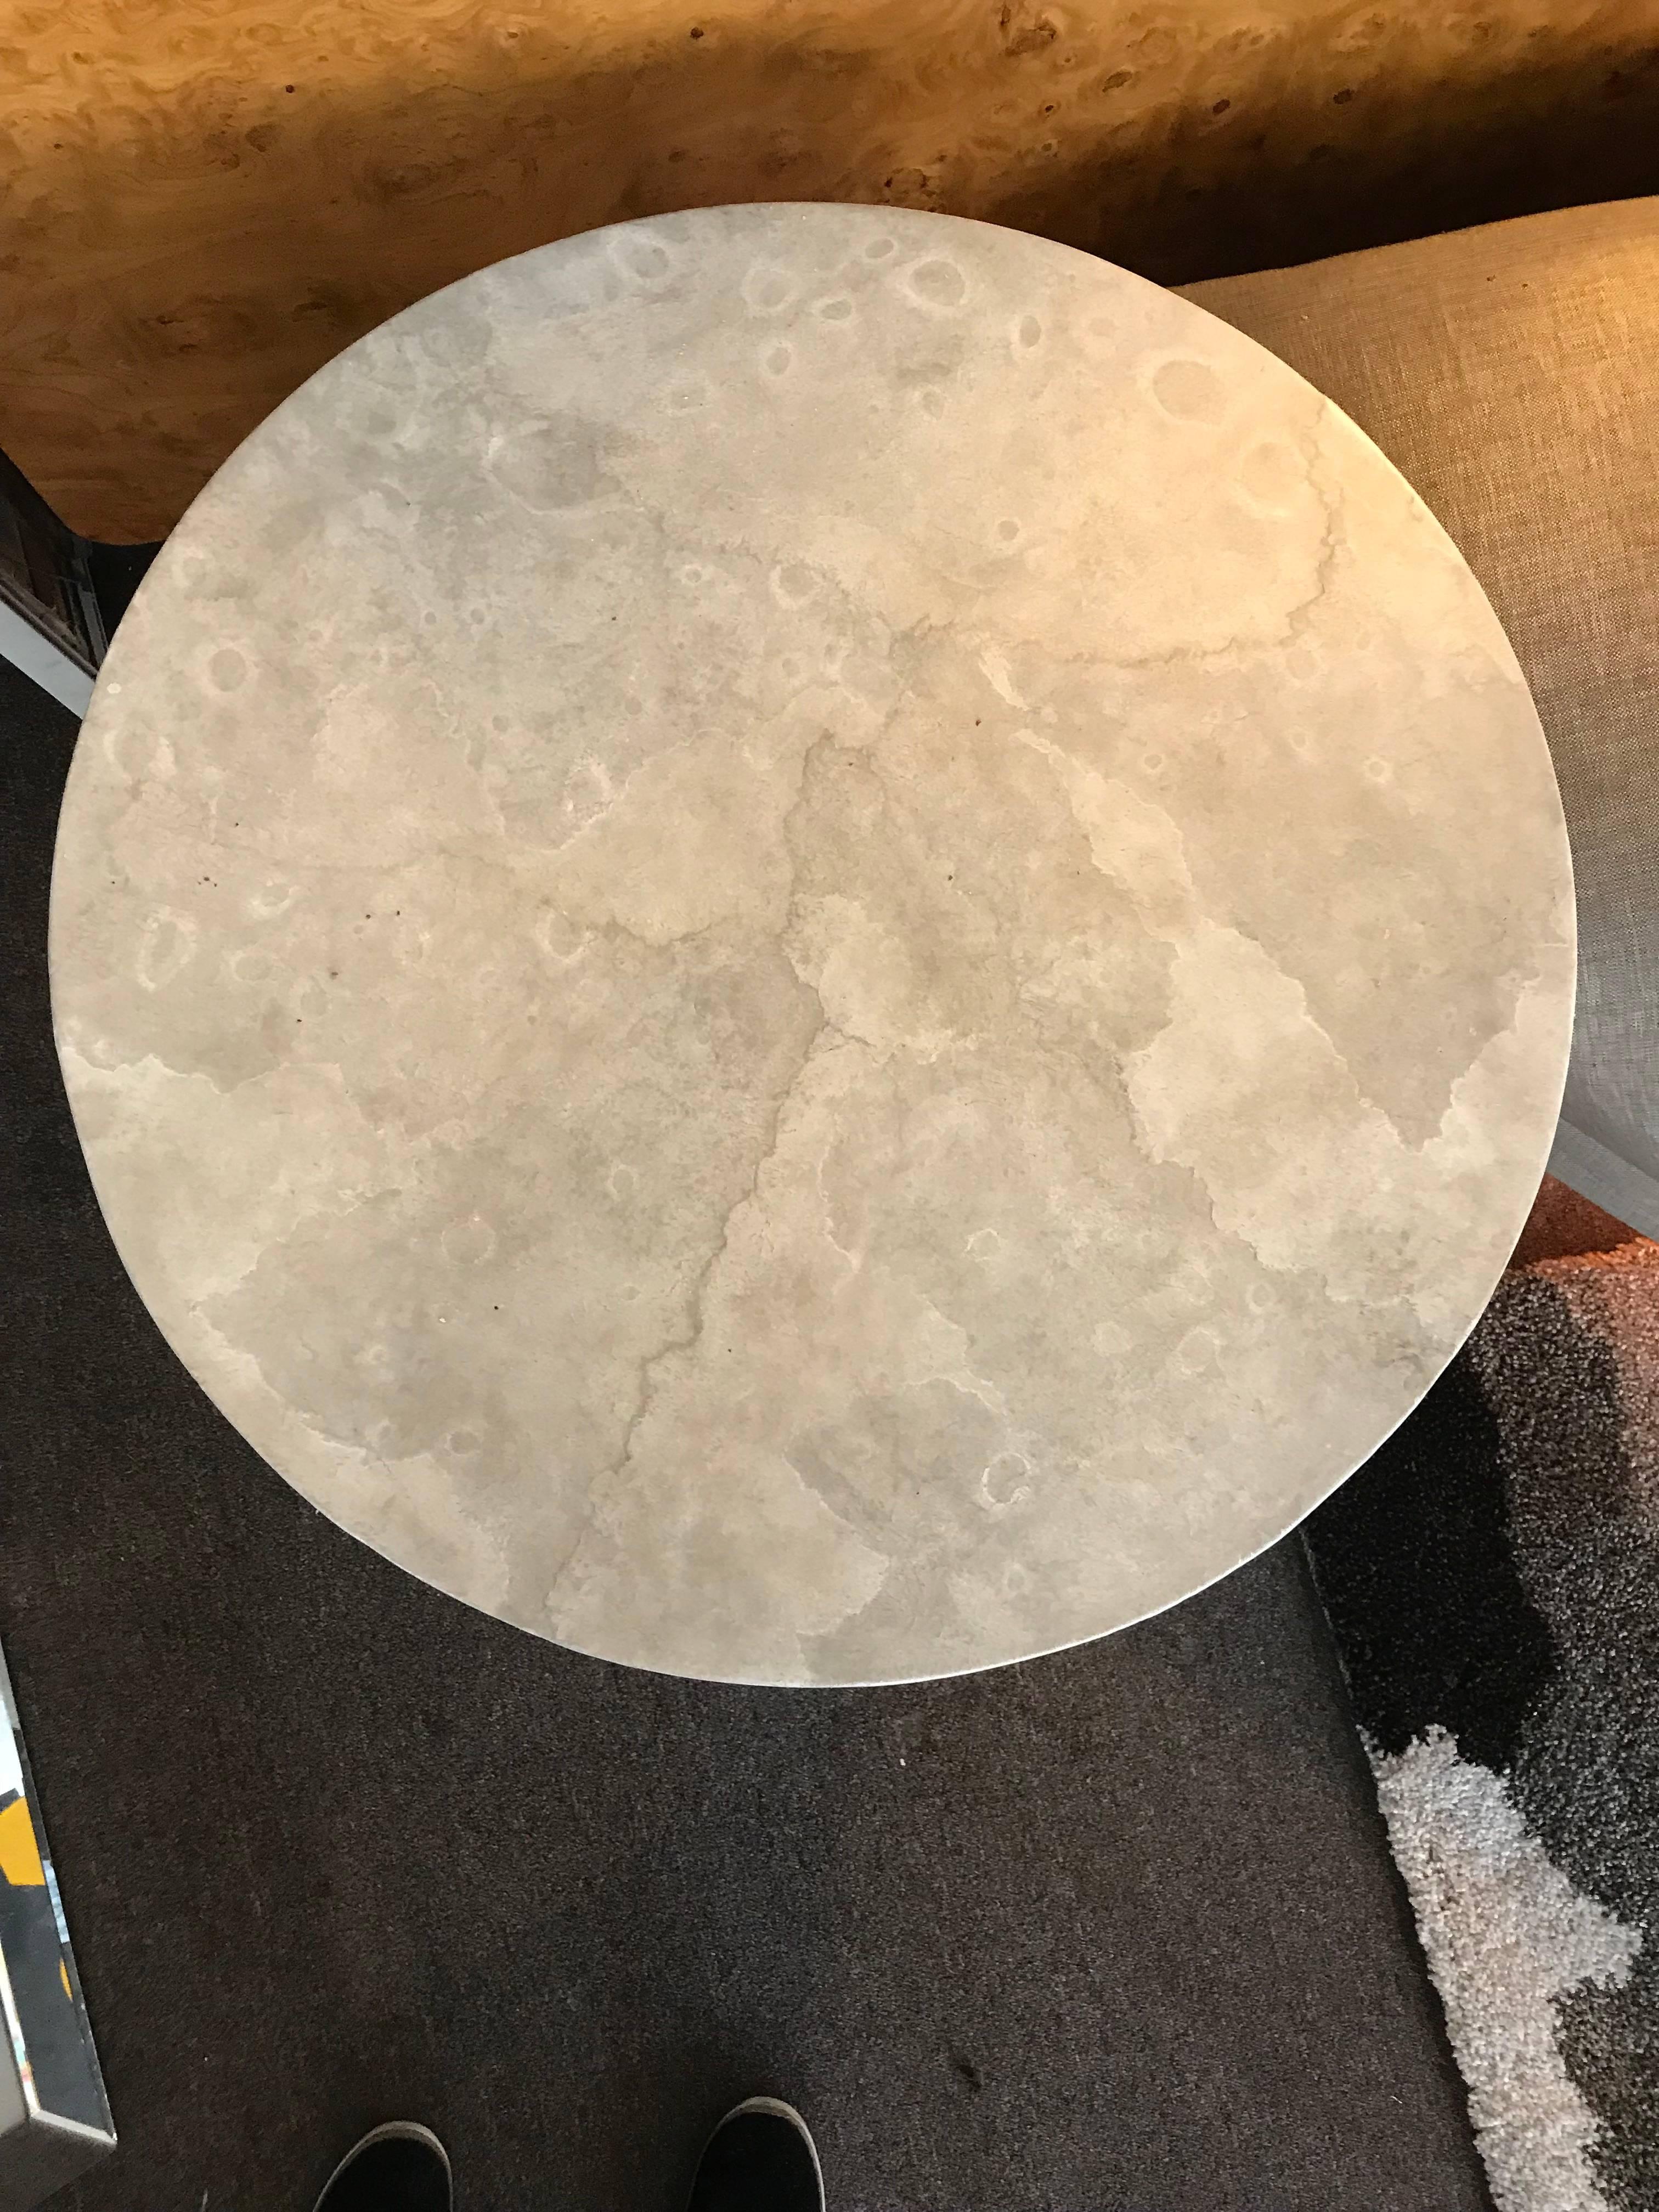 This table came from a gorgeous Designer Estate in the Palm Springs area. I believe this side table and cool matching gorgeous coffee table (available on separate listing) were made for the residence. Very modern and super chic. The faux finish